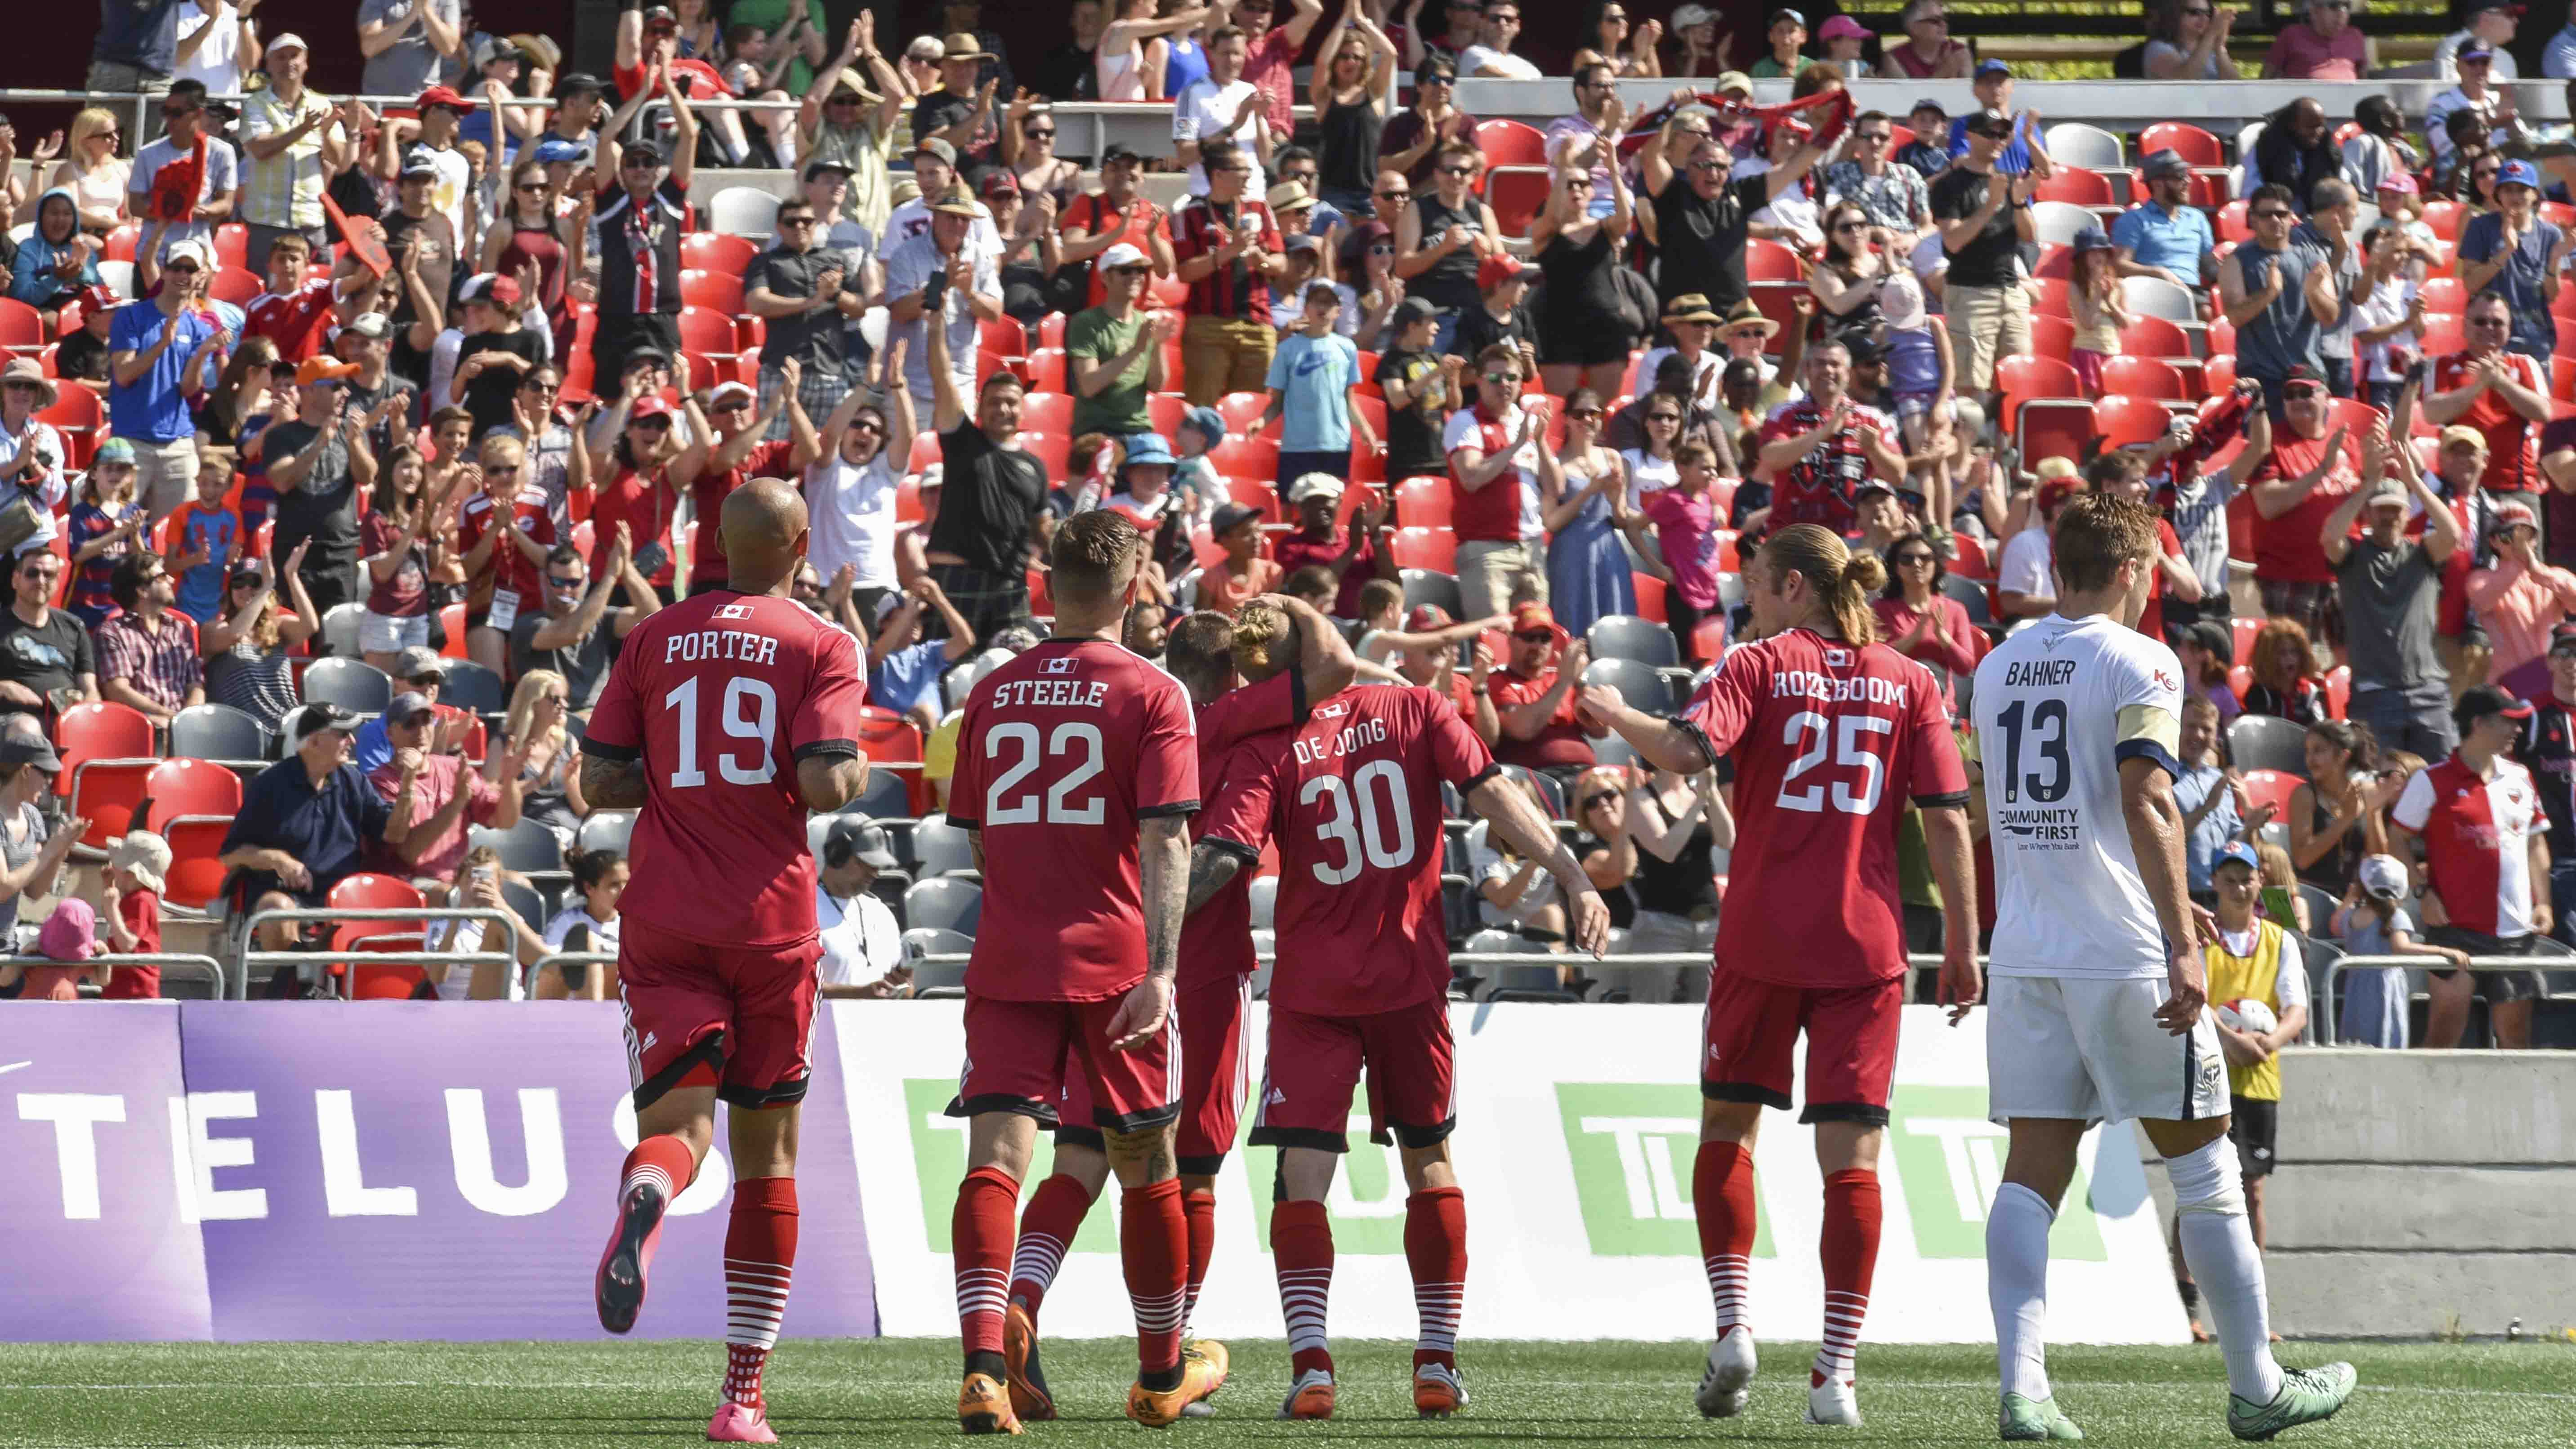 NASL match between the Ottawa Fury FC and Jacksonville Armada FC at TD Place Stadium in Ottawa, ON. Canada on May 22, 2016. Ottawa Fury FC winning 1-0 after an 88th minute goal from Marcel De Jong. PHOTO: Steve Kingsman/Freestyle Photography